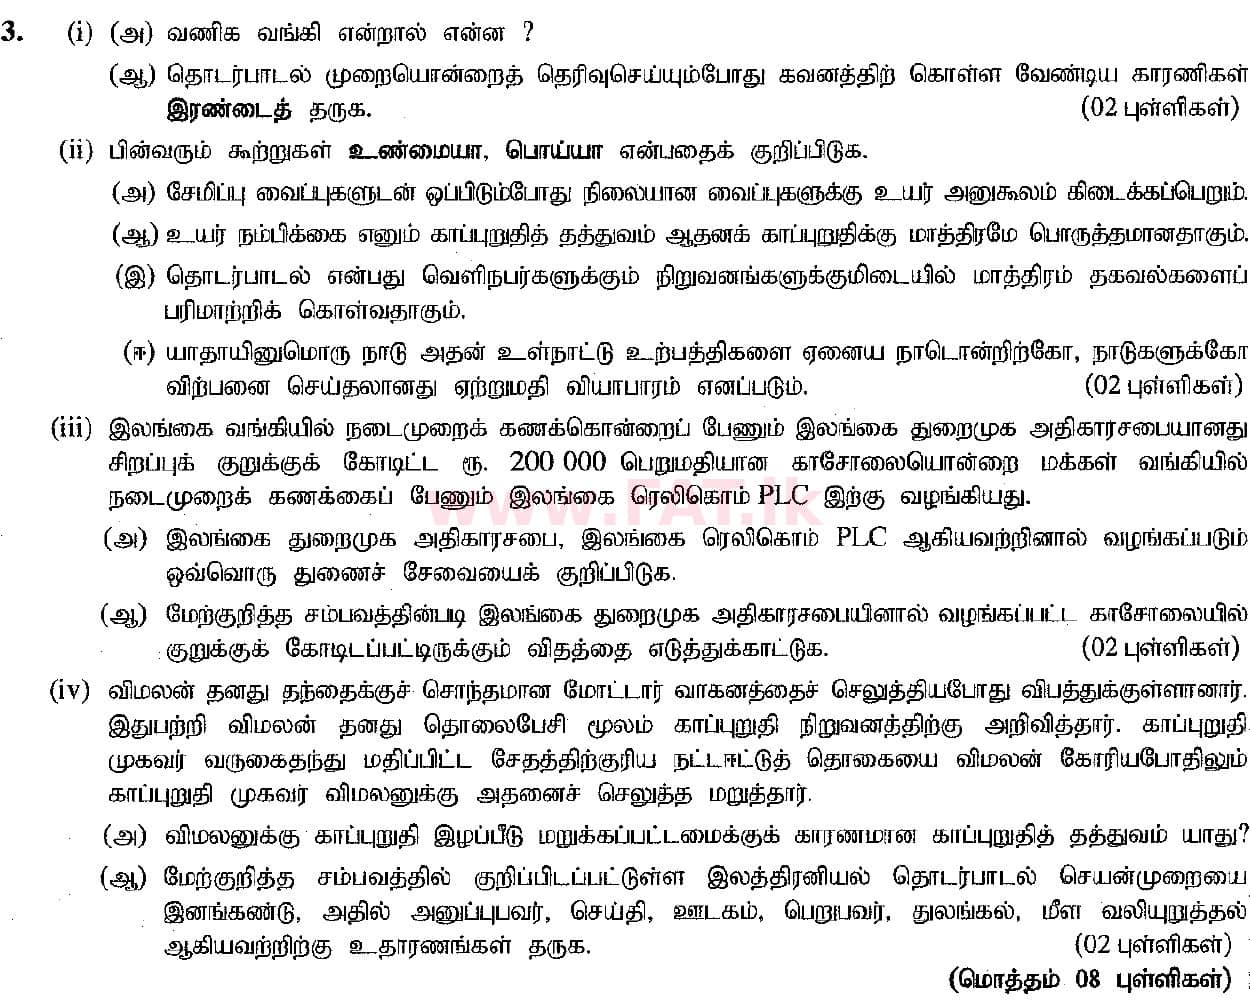 National Syllabus : Ordinary Level (O/L) Business and Accounting Studies - 2019 March - Paper II (தமிழ் Medium) 3 1